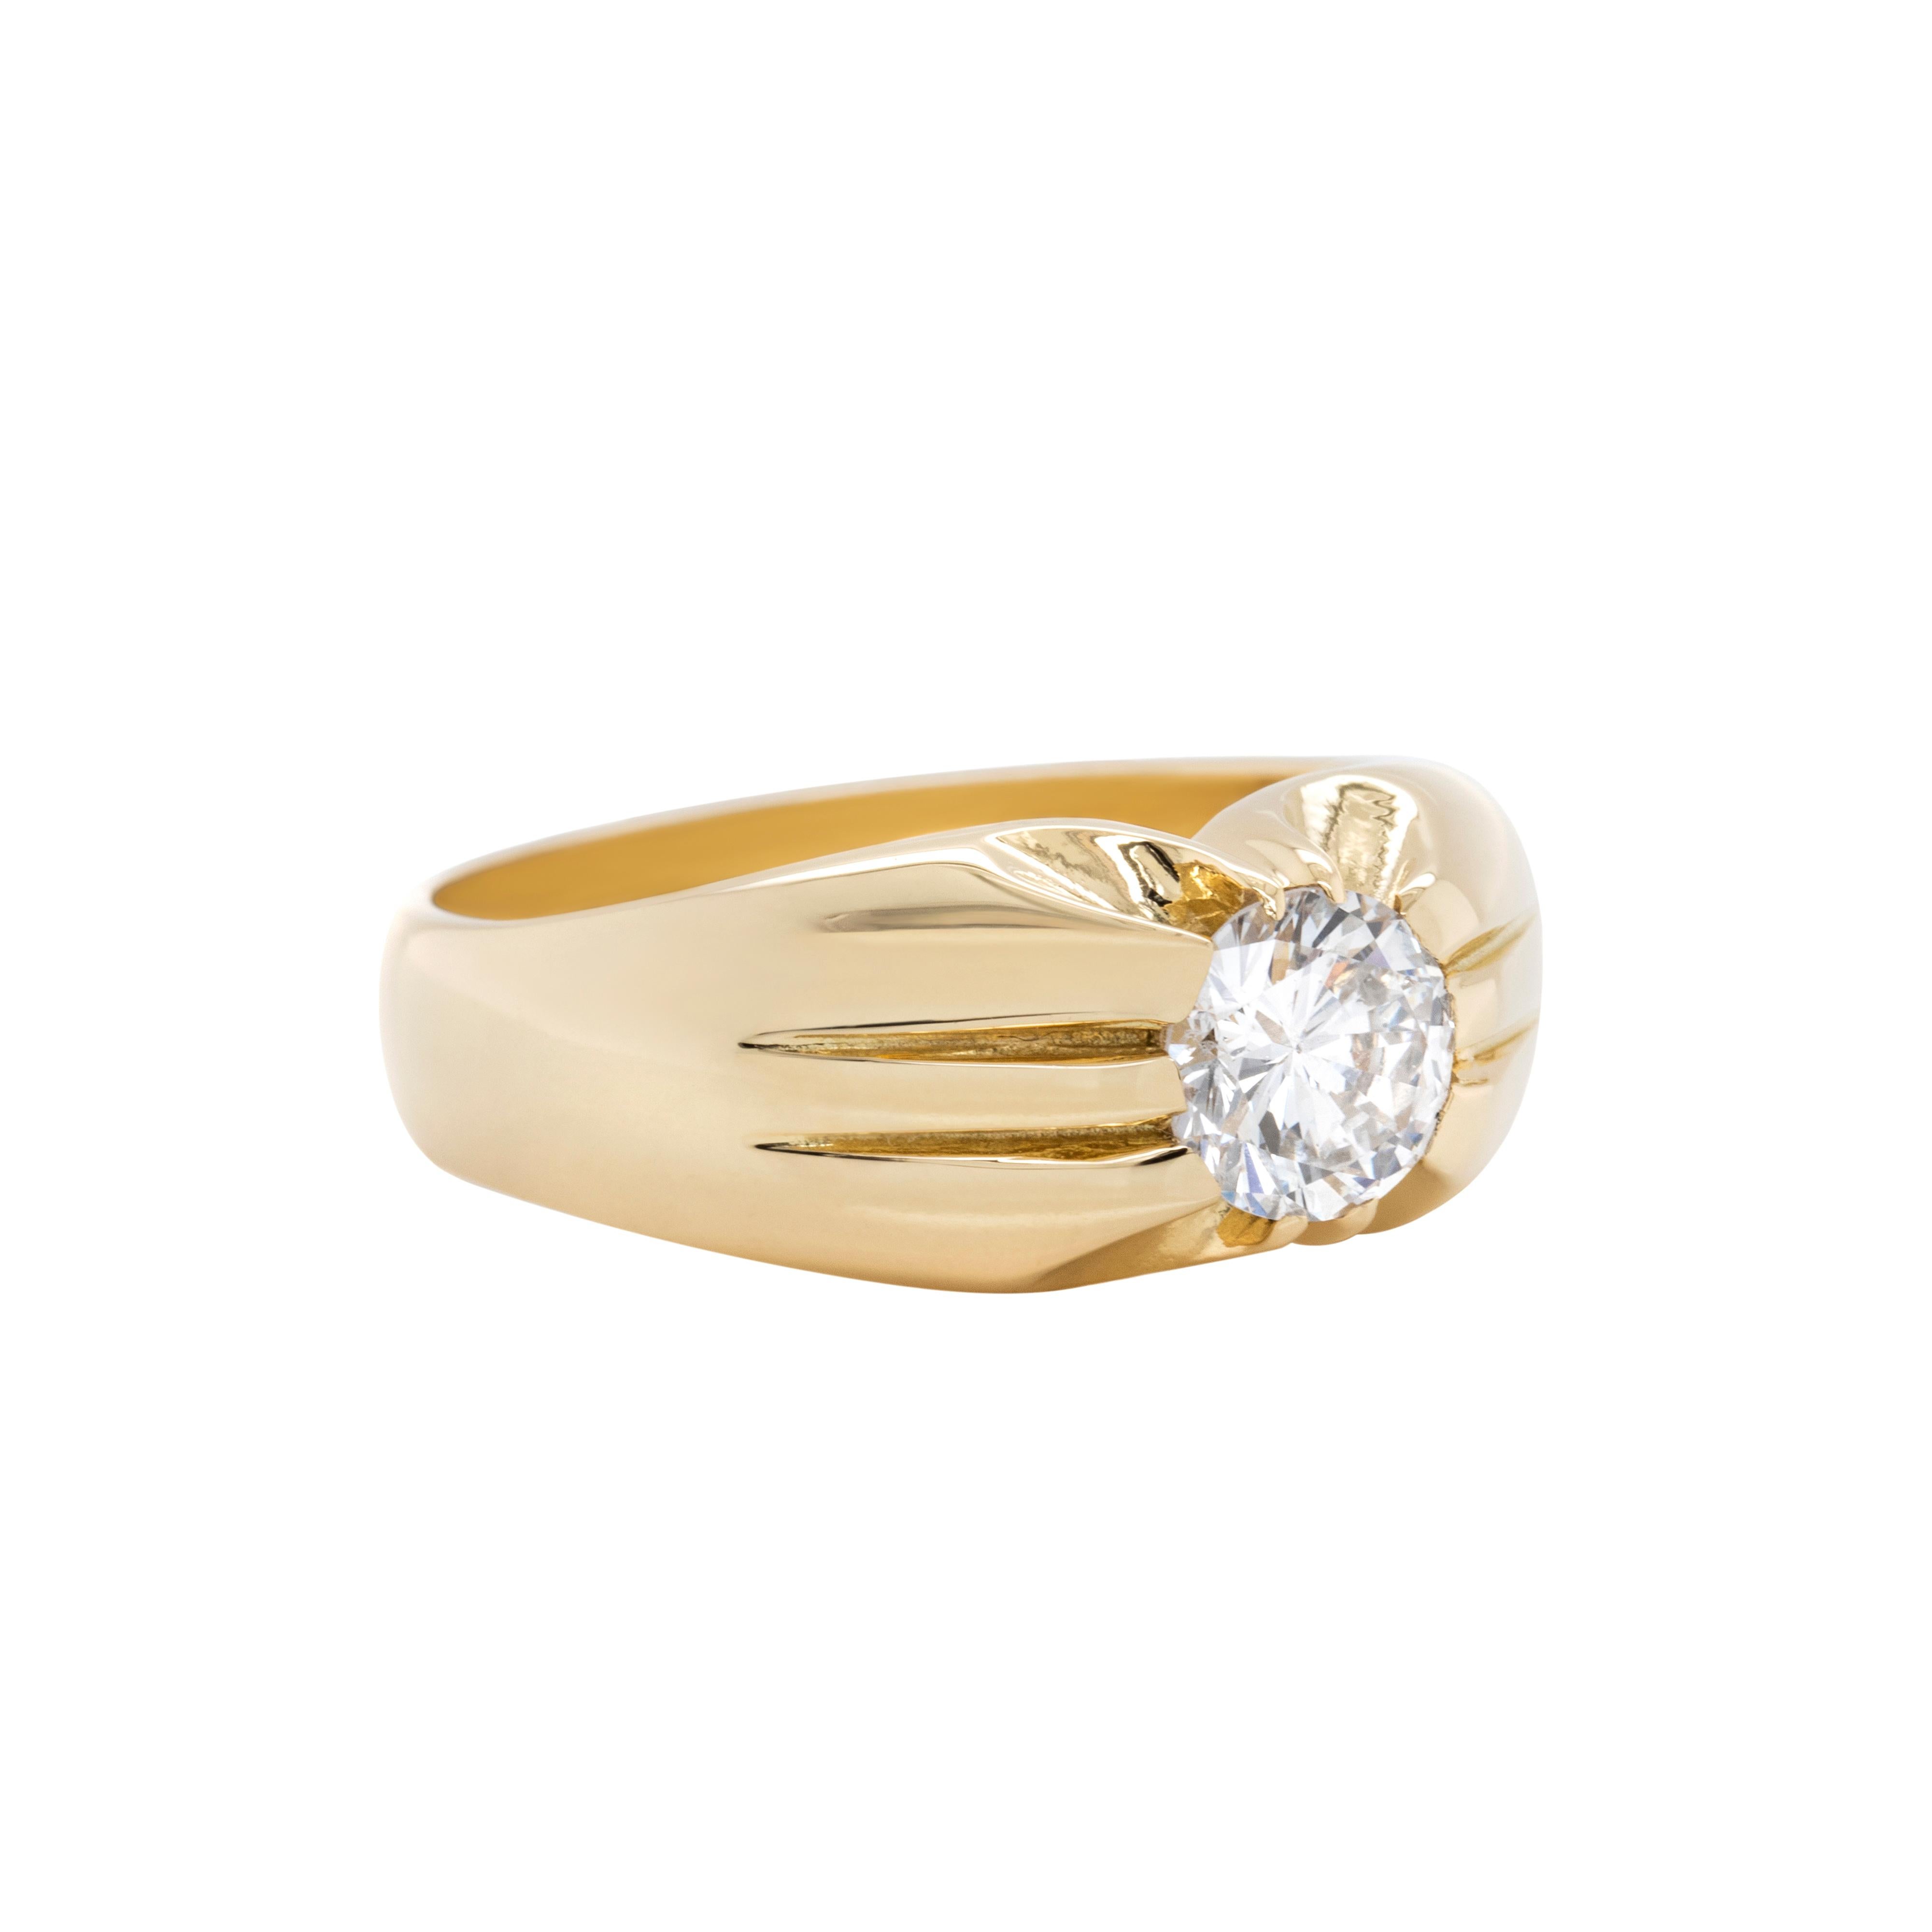 This classic design gents ring is wonderfully set with a 1.07 carat round brilliant cut diamond set in a 10 claw, open back setting. The width of the 18 carat yellow gold ring measures 9.37mm, tapering to 4.43mm and weighs 9.64g. Hallmarked and